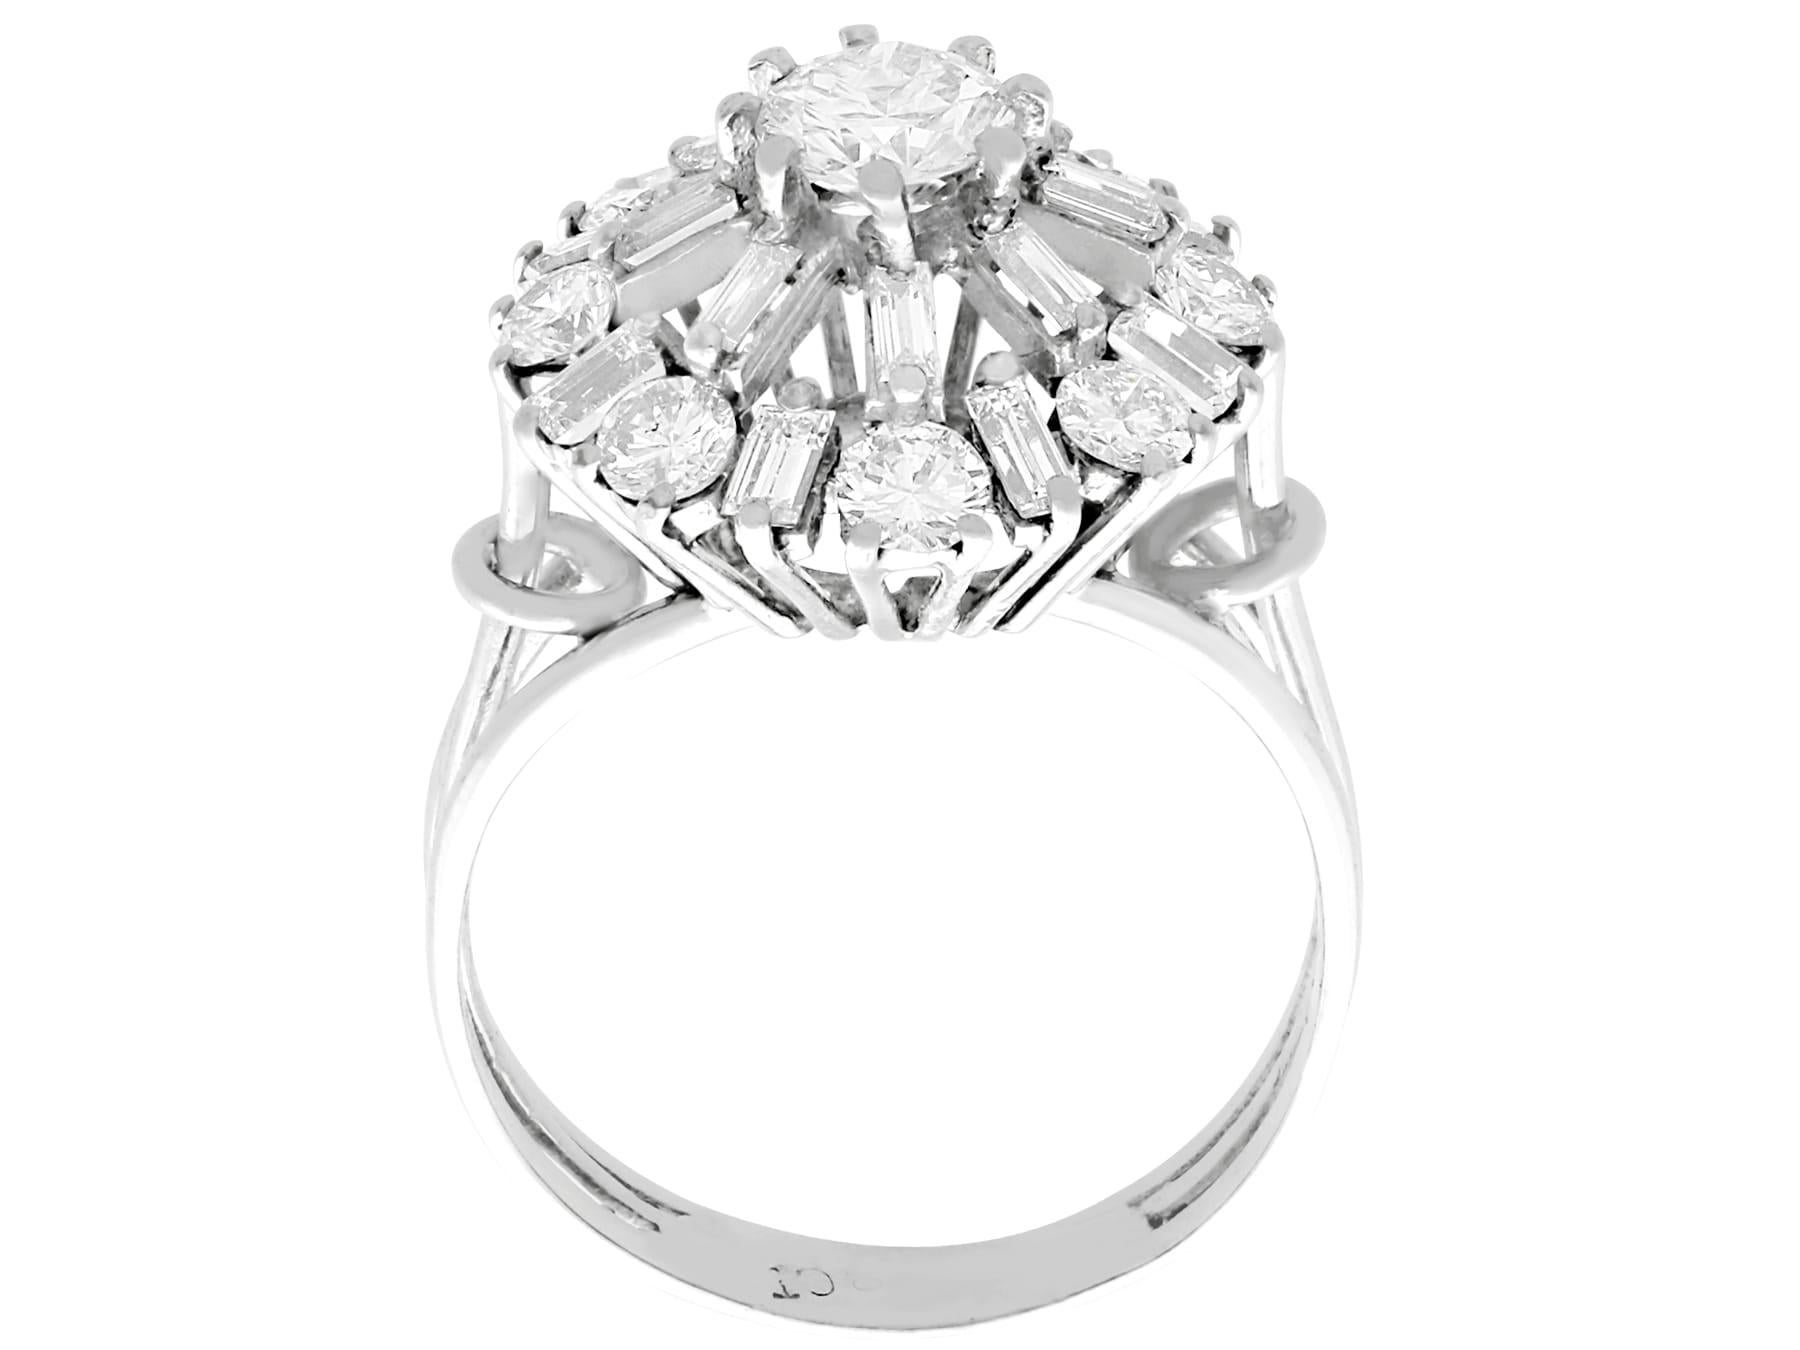 Vintage 1960s 2.00 Carat Diamond and White Gold Cluster Ring In Excellent Condition For Sale In Jesmond, Newcastle Upon Tyne